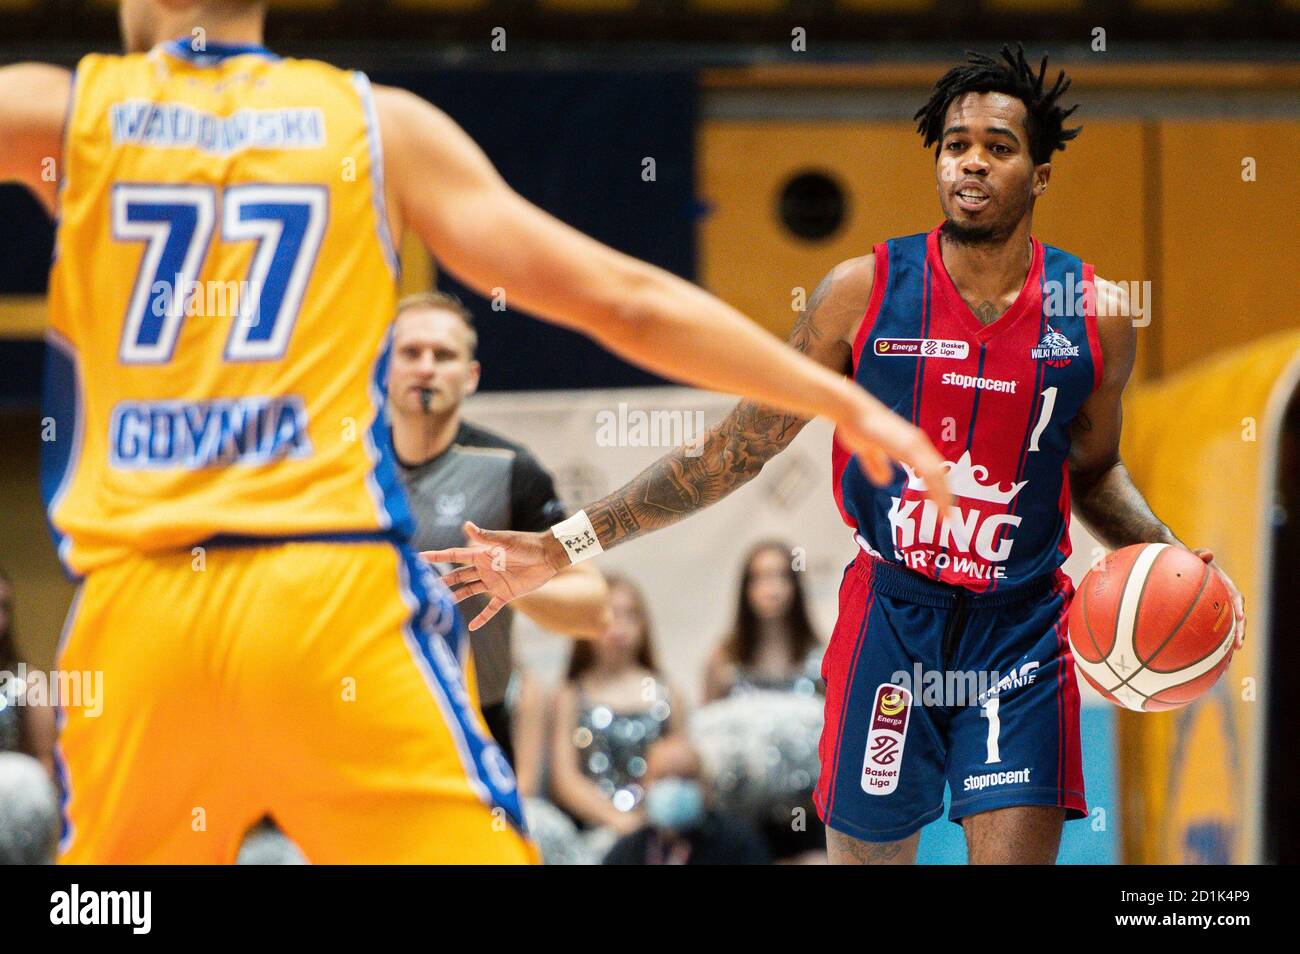 Gdynia, Poland. 05th Oct, 2020. Kasey Hill of King seen in action during  the Energa Basket League match between Asseco Arka Gdynia and King Szczecin.(Final  score; Asseco Arka Gdynia 95:74 King Szczecin)